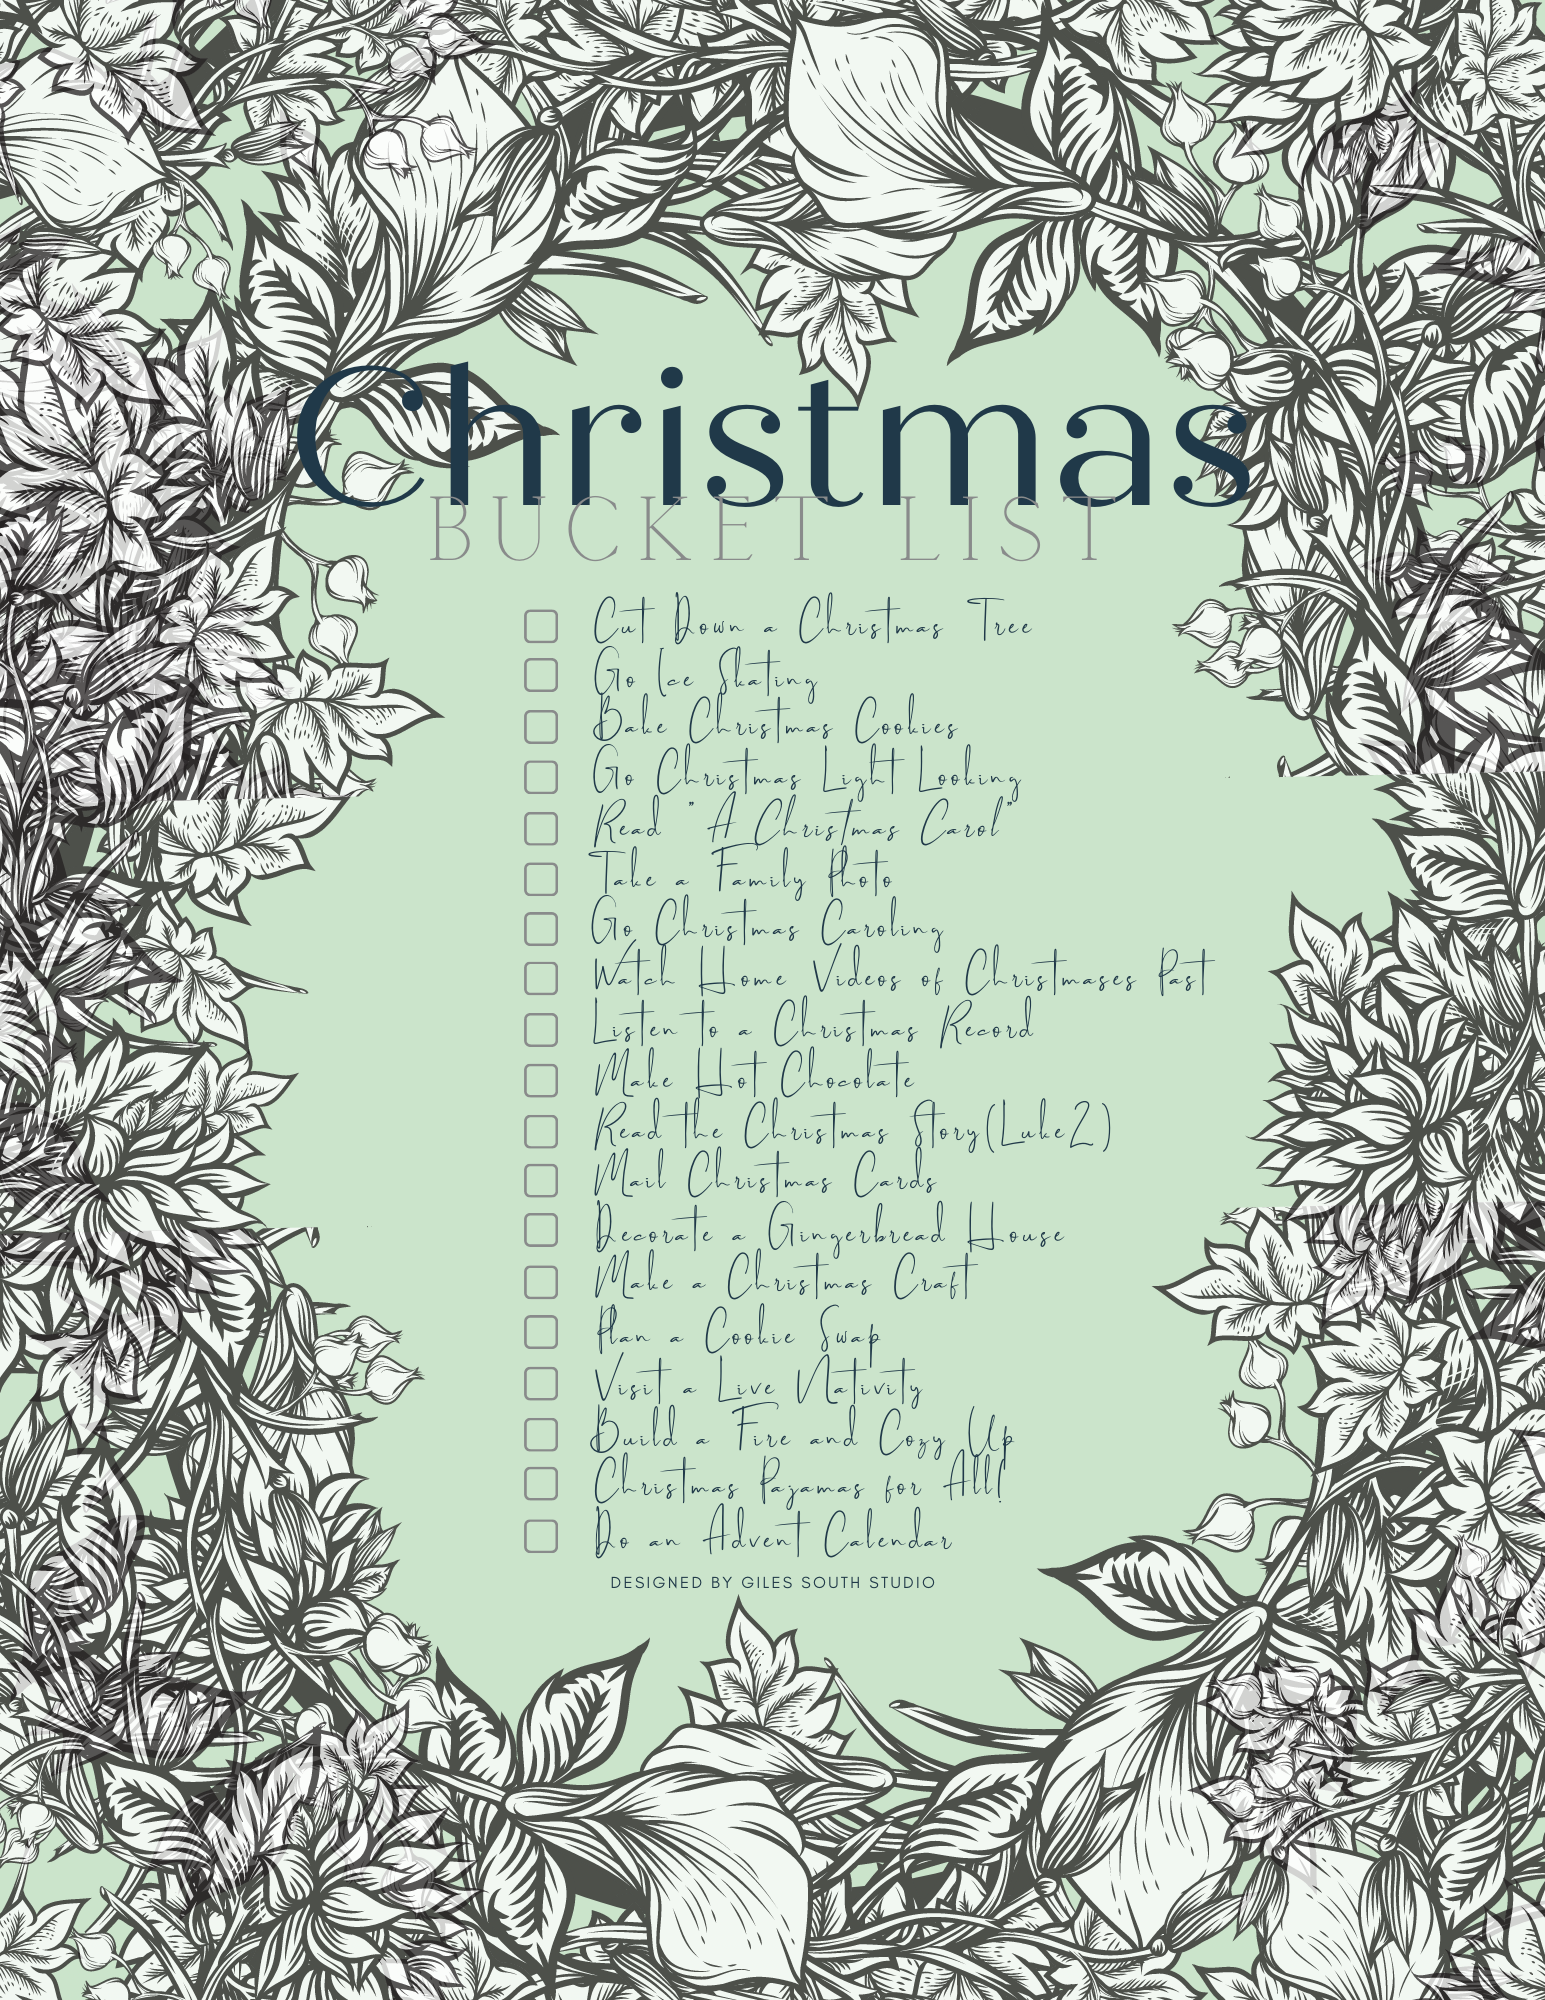 A Mindful Christmas Bucket List Printable (oh yeah, it’s free!)